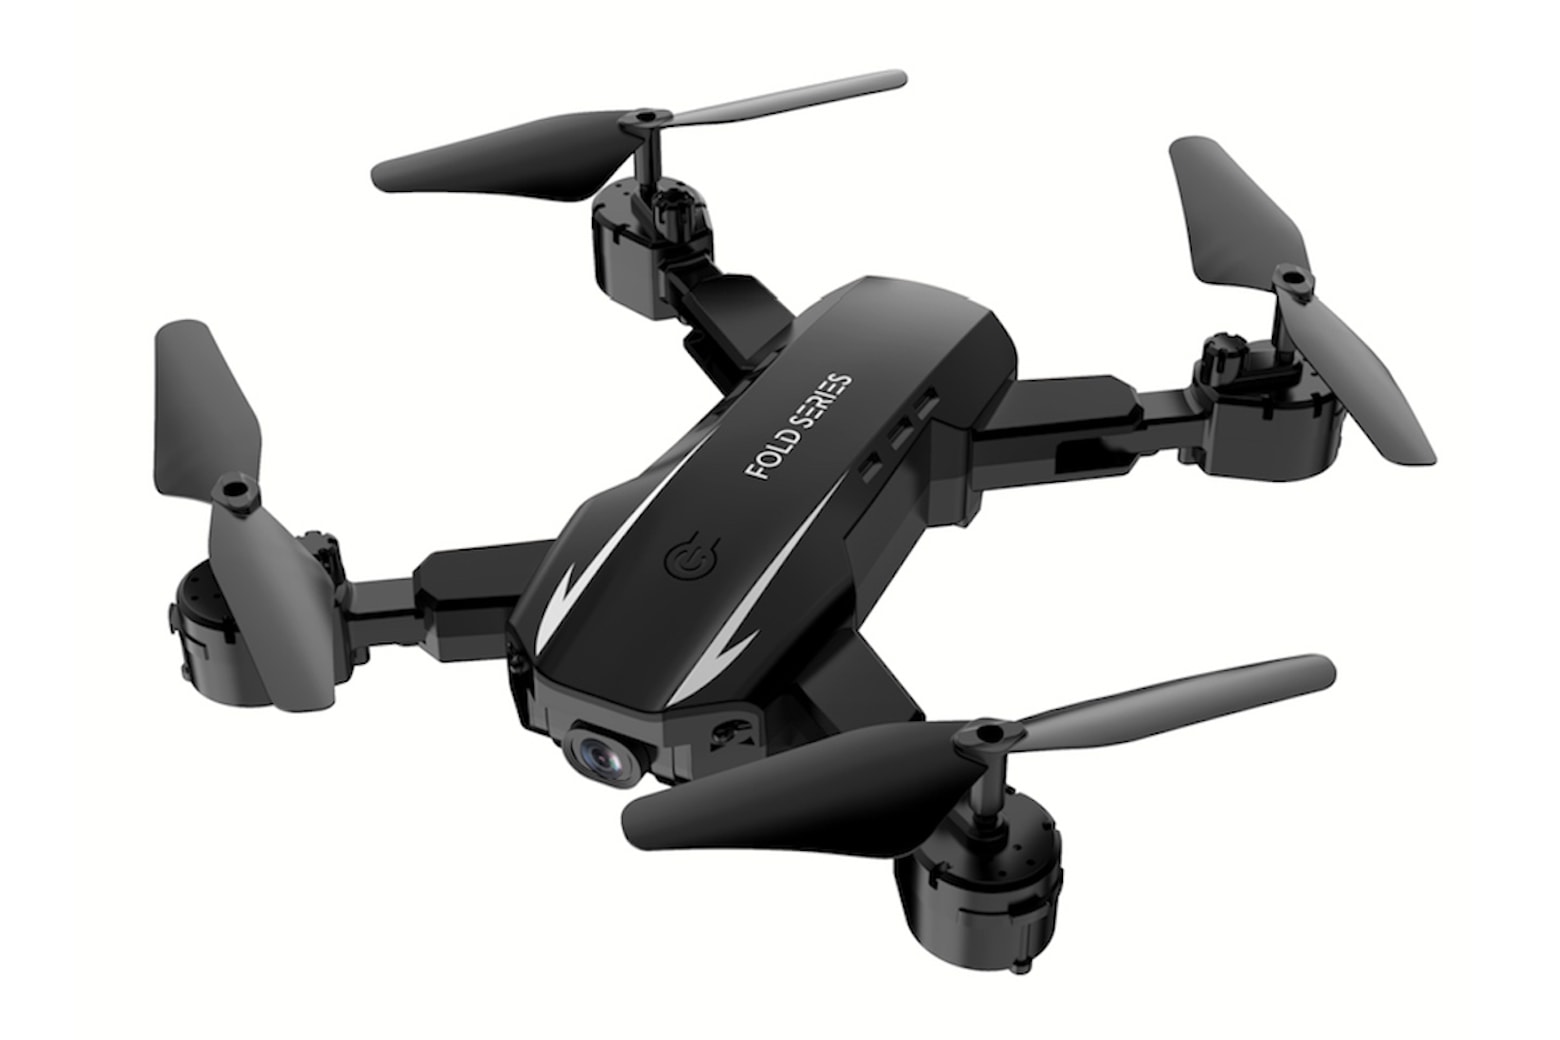 This 4K dual-camera drone costs less than $80, with guaranteed delivery before Christmas